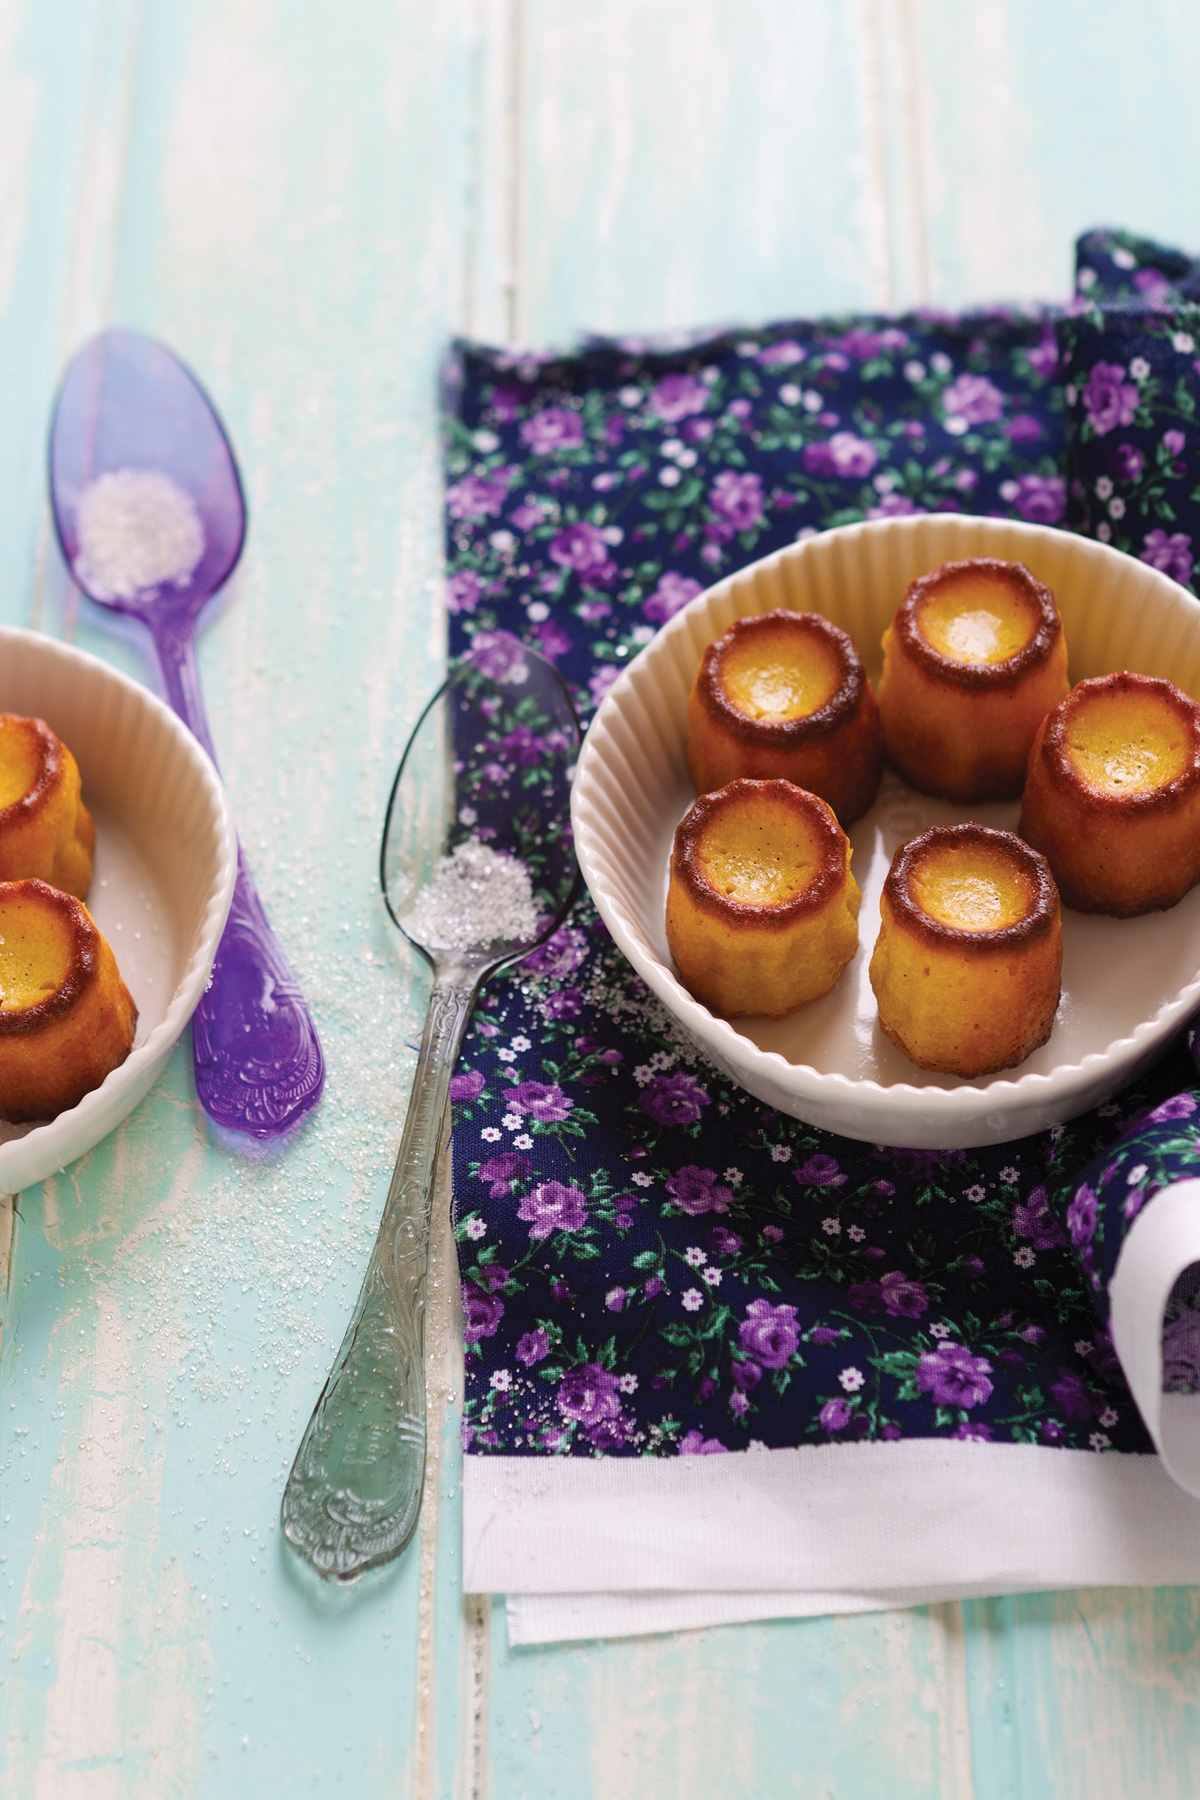 Image of Beatrice Peltre's Canneles